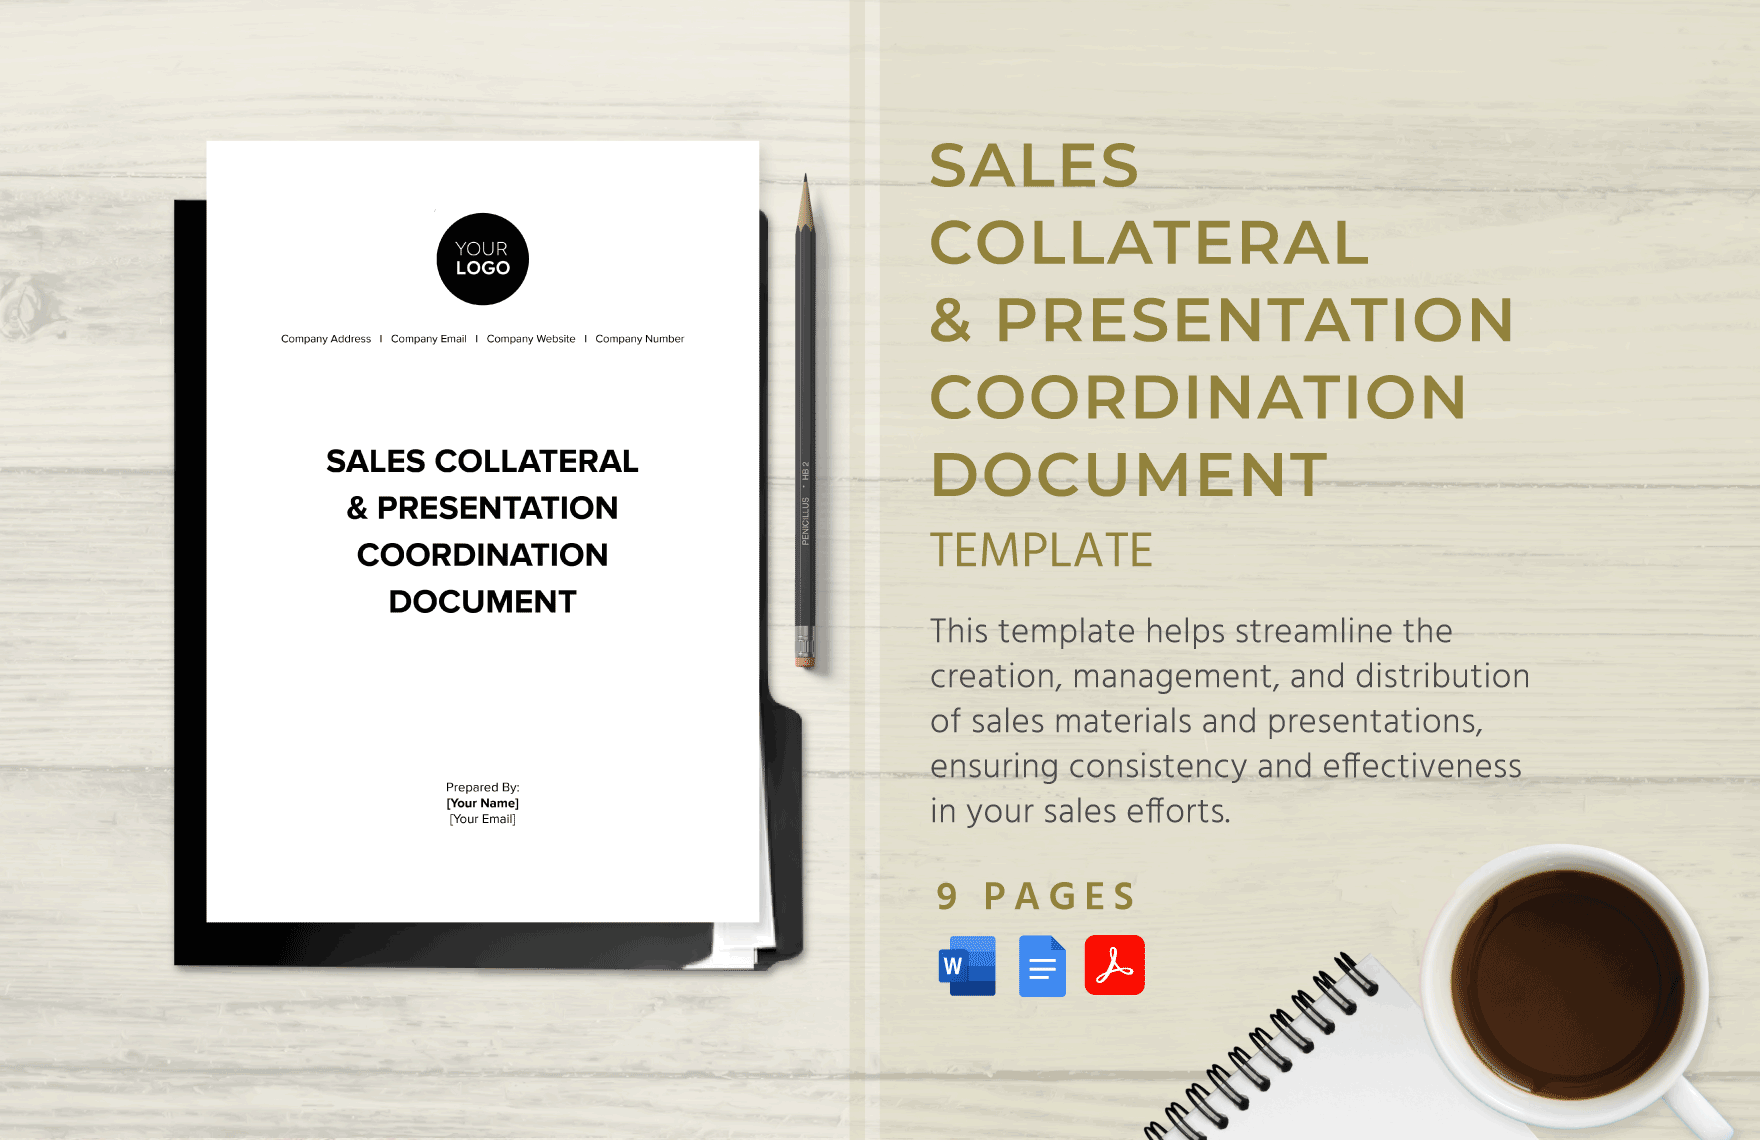 Sales Collateral & Presentation Coordination Document Template in Word, Google Docs, PDF